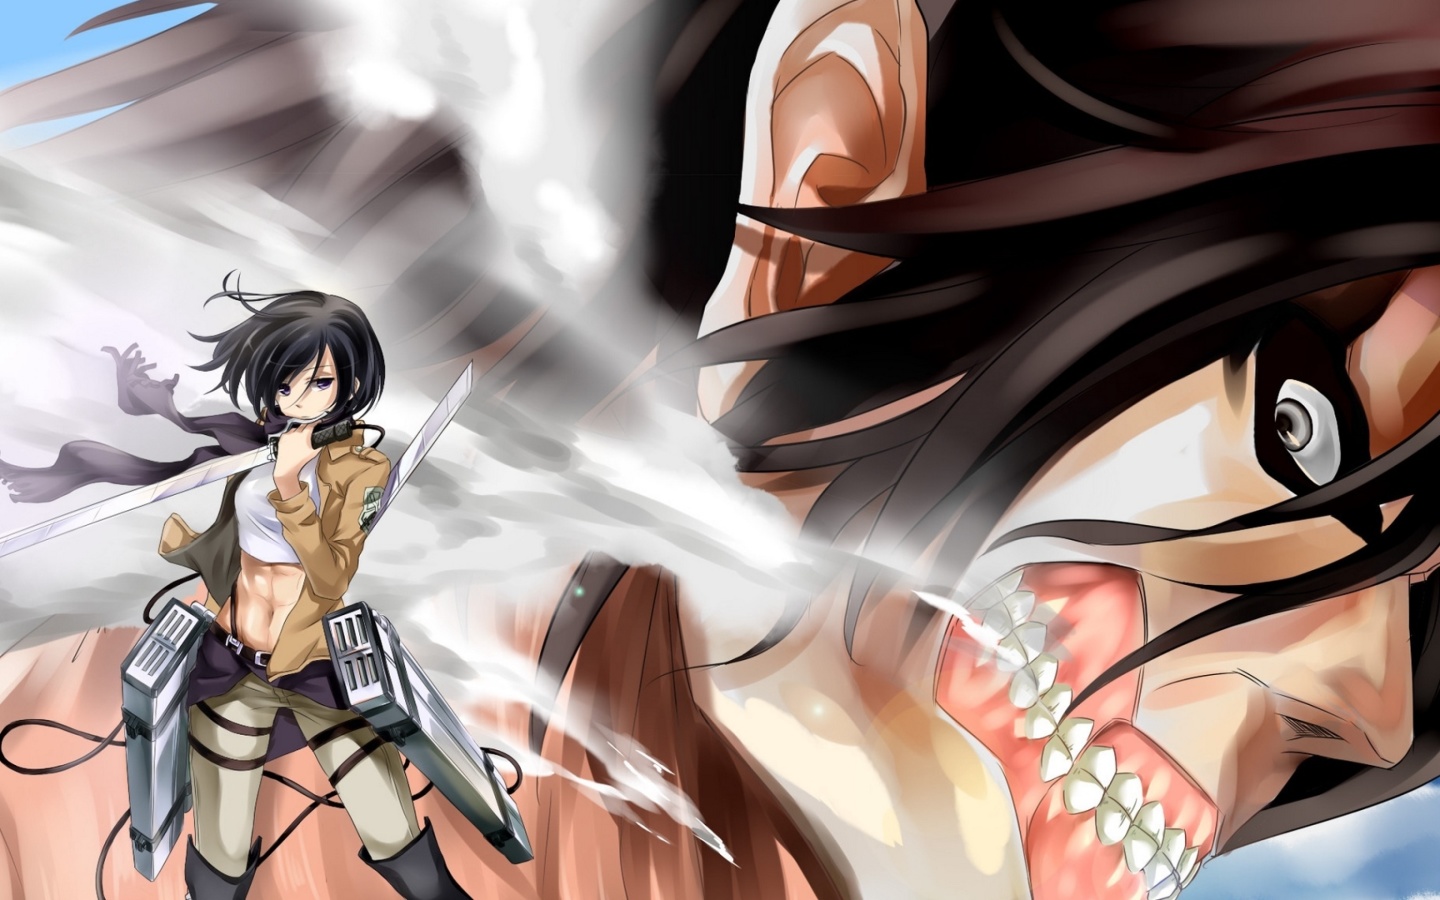 Attack on Titan with Eren and Mikasa wallpaper 1440x900